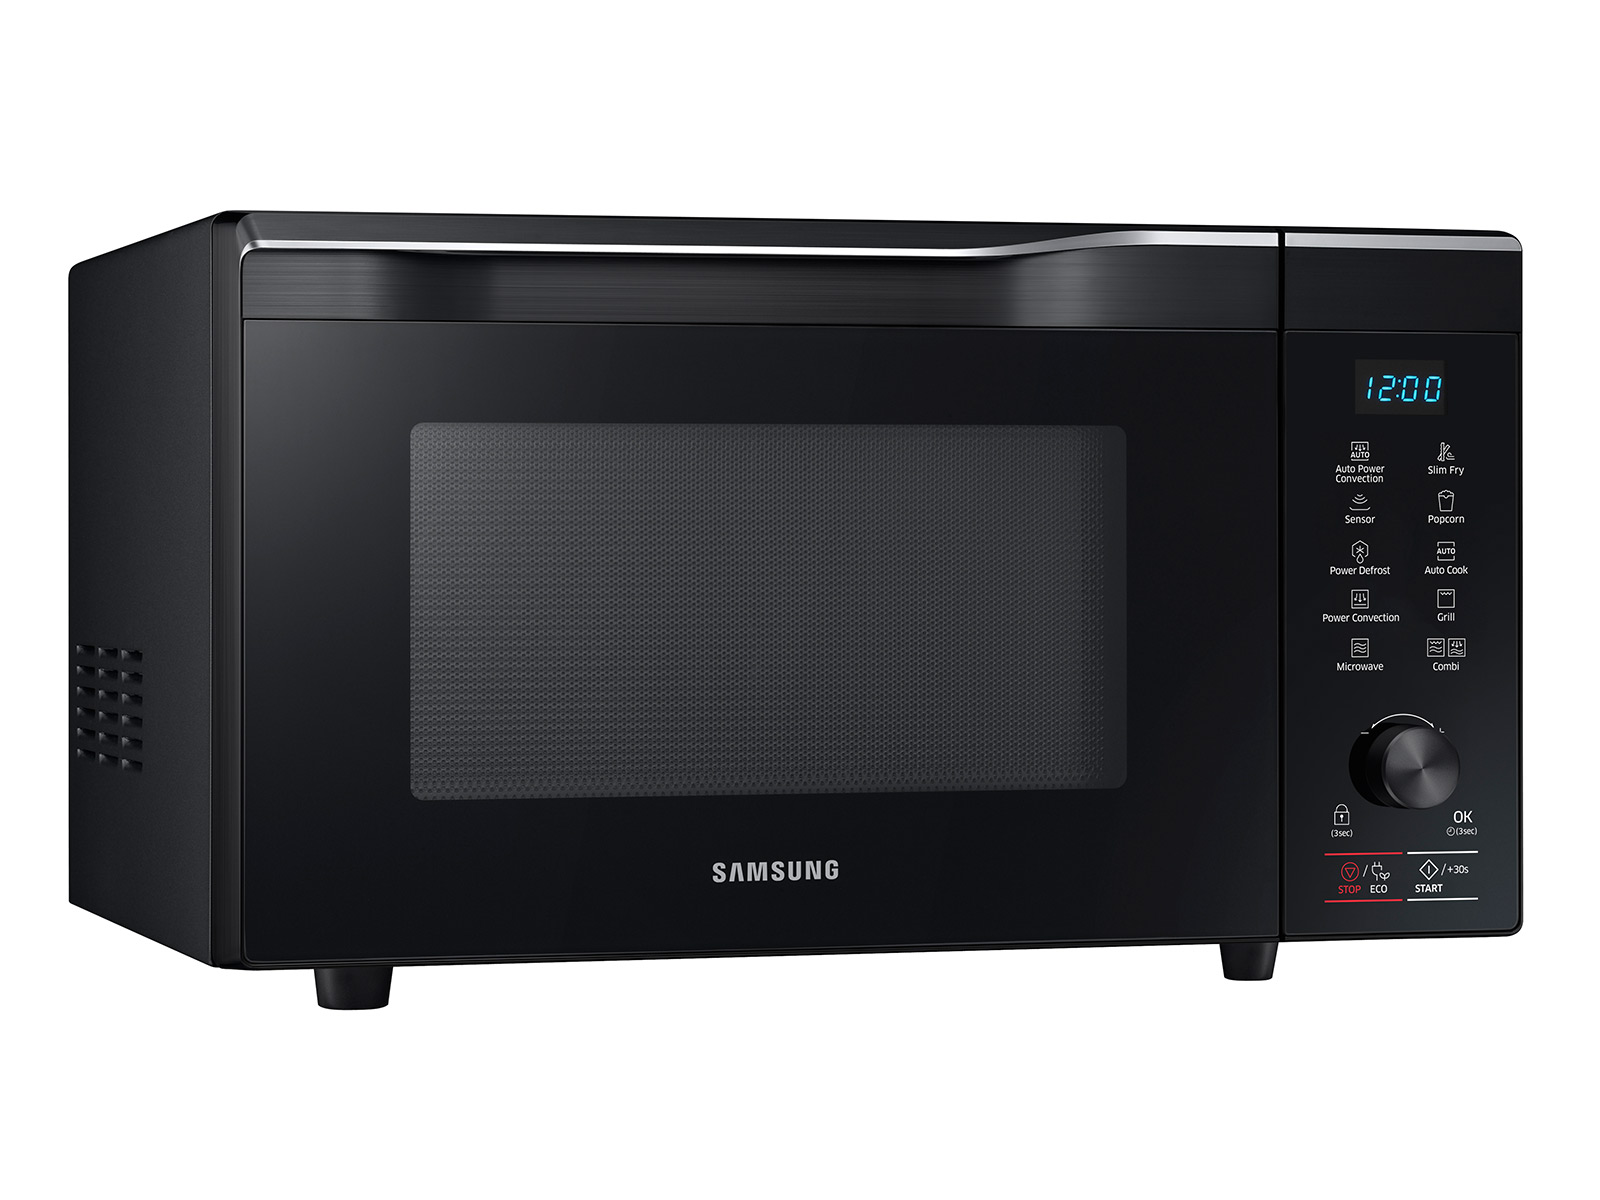 Best Microwave Toaster Oven Combo: Buyer's Guide & Reviews in 2023   Countertop convection oven, Countertop microwave oven, Countertop microwave